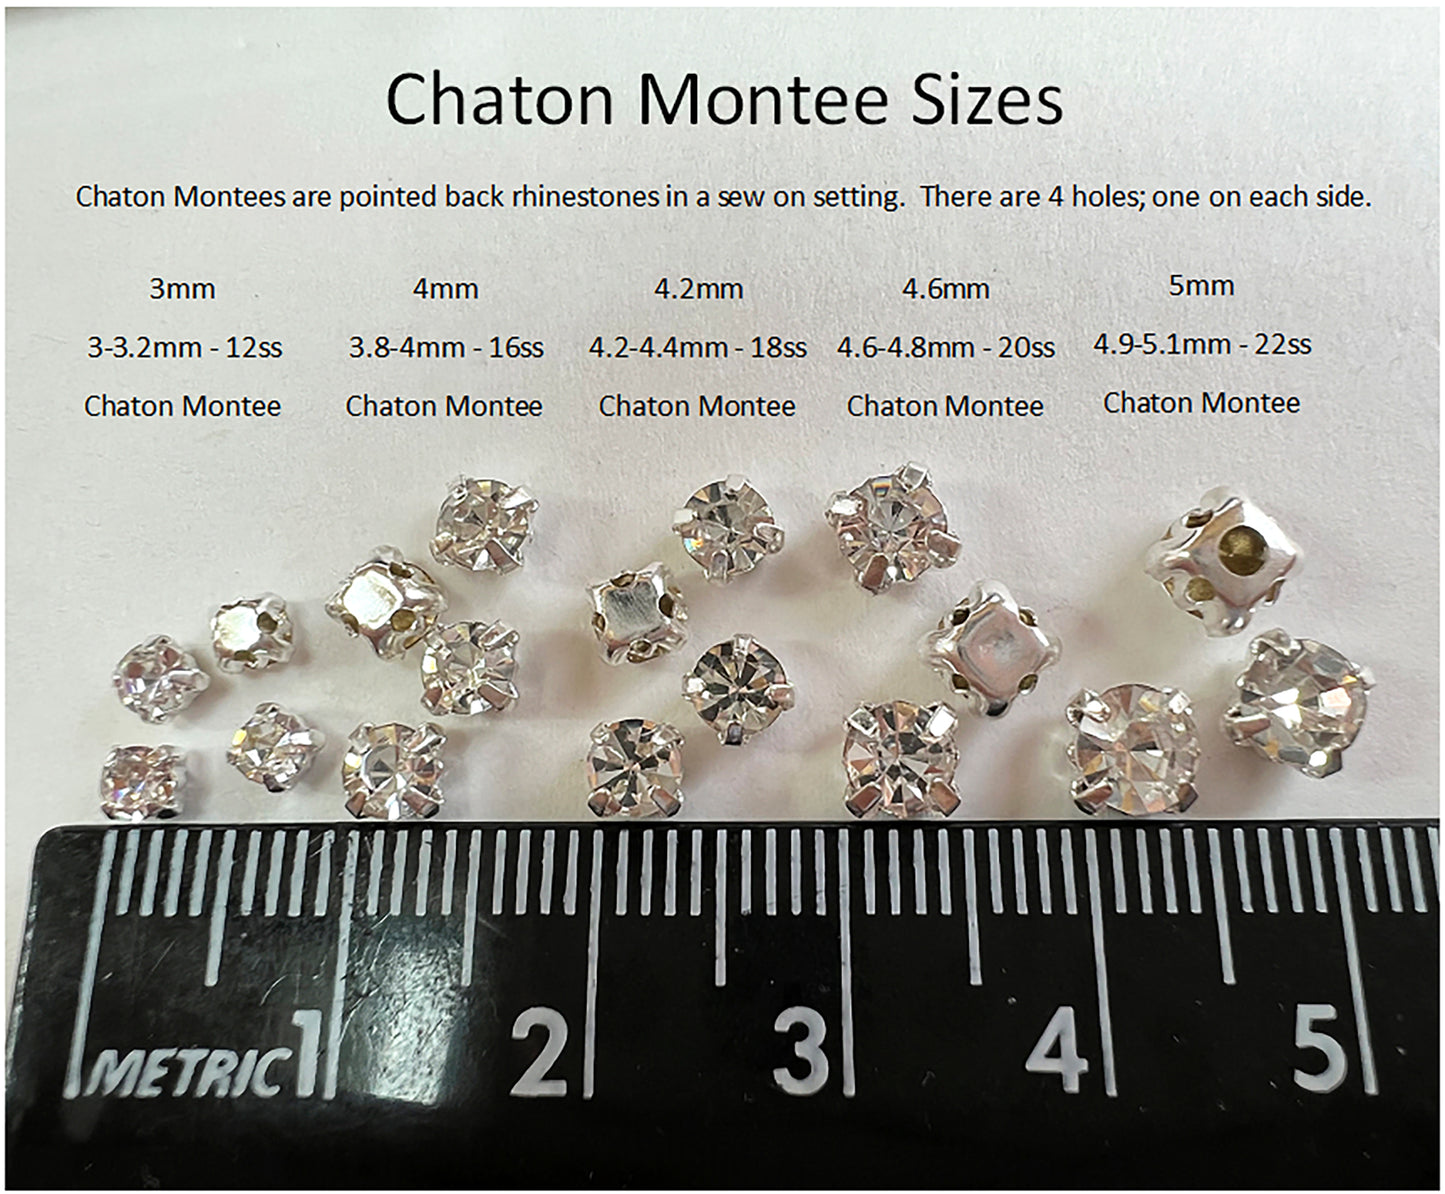 Glass Chaton Montees 20ss (4.6-4.8mm) Crystal with Silver Setting